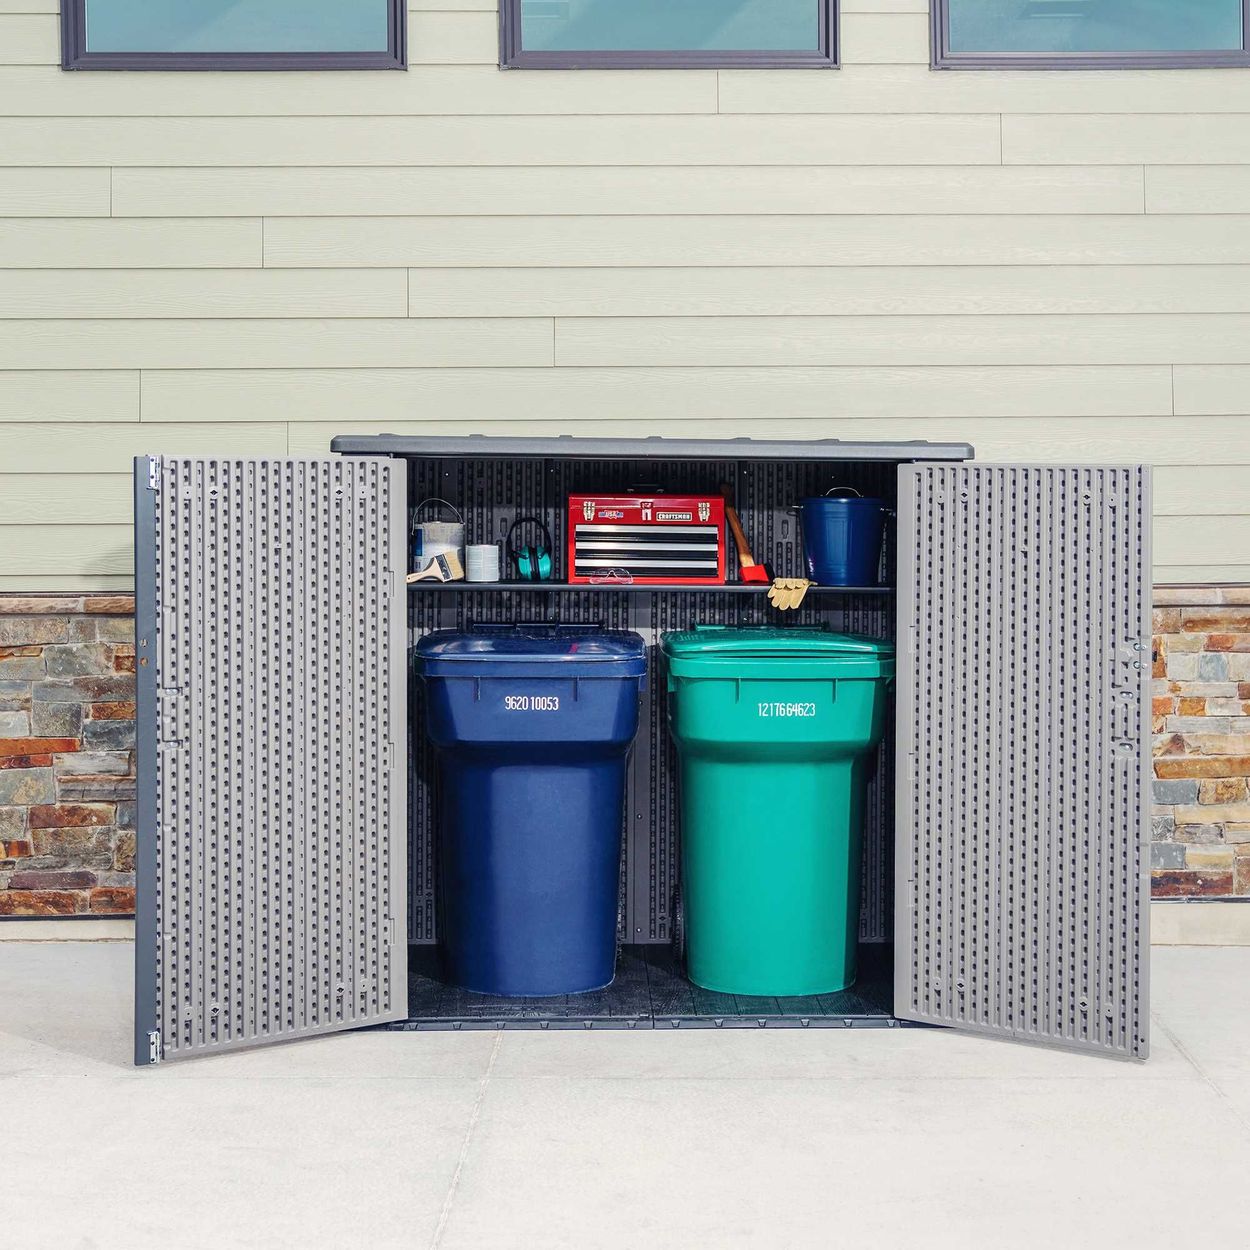 Open Utility Shed with two large garbage cans inside and several tools on the shelf inside of the shed.